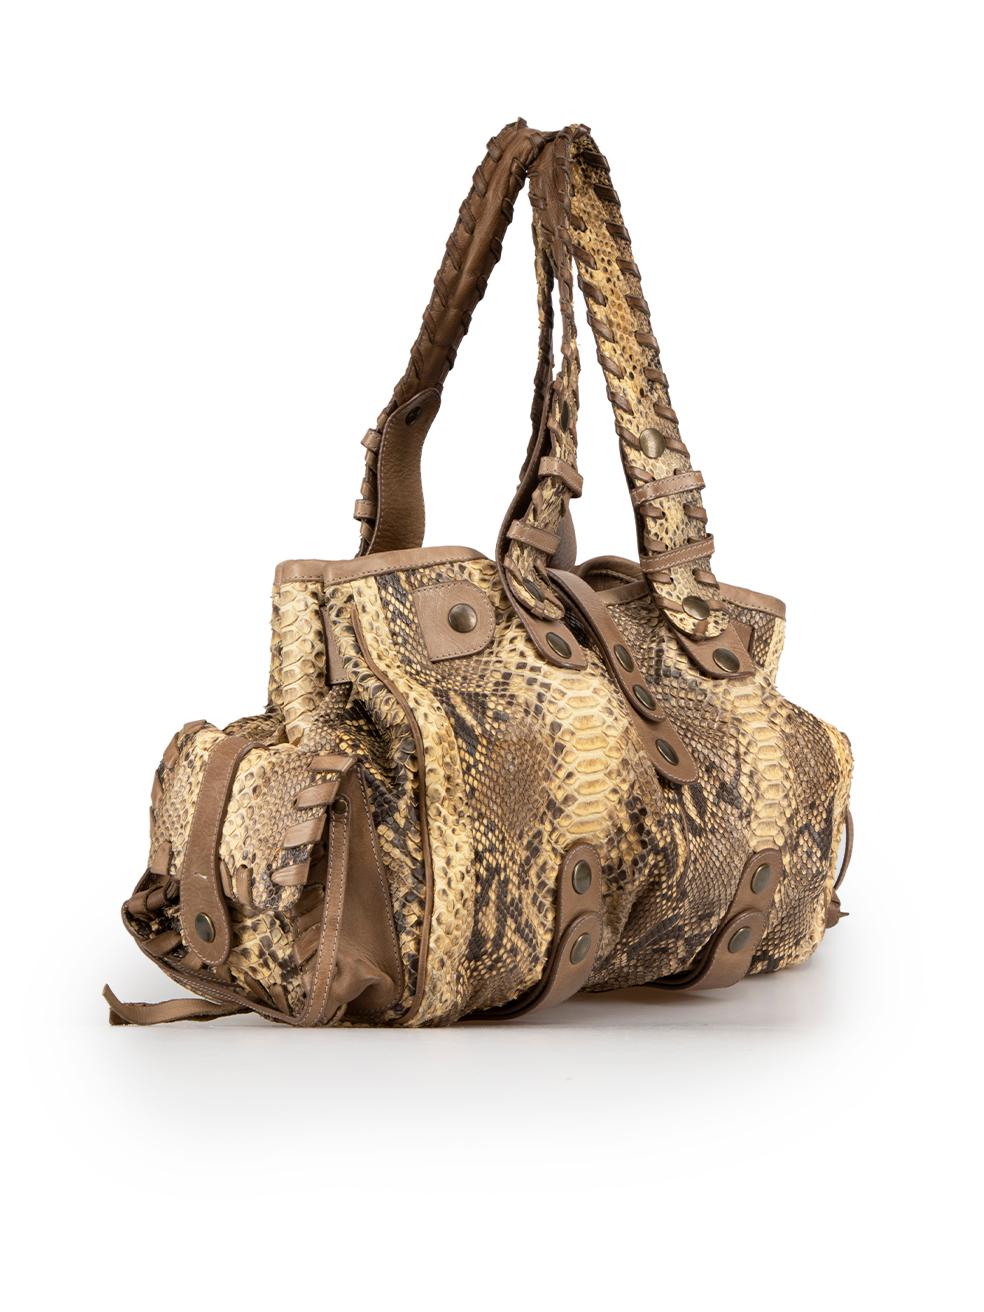 CONDITION is Good. Minor wear to bag is evident. Light wear to the snakeskin with general peeling of the scales due to age, scratches to the metal feet at the base and marks to the lining on this used Chlo√© designer resale item.
